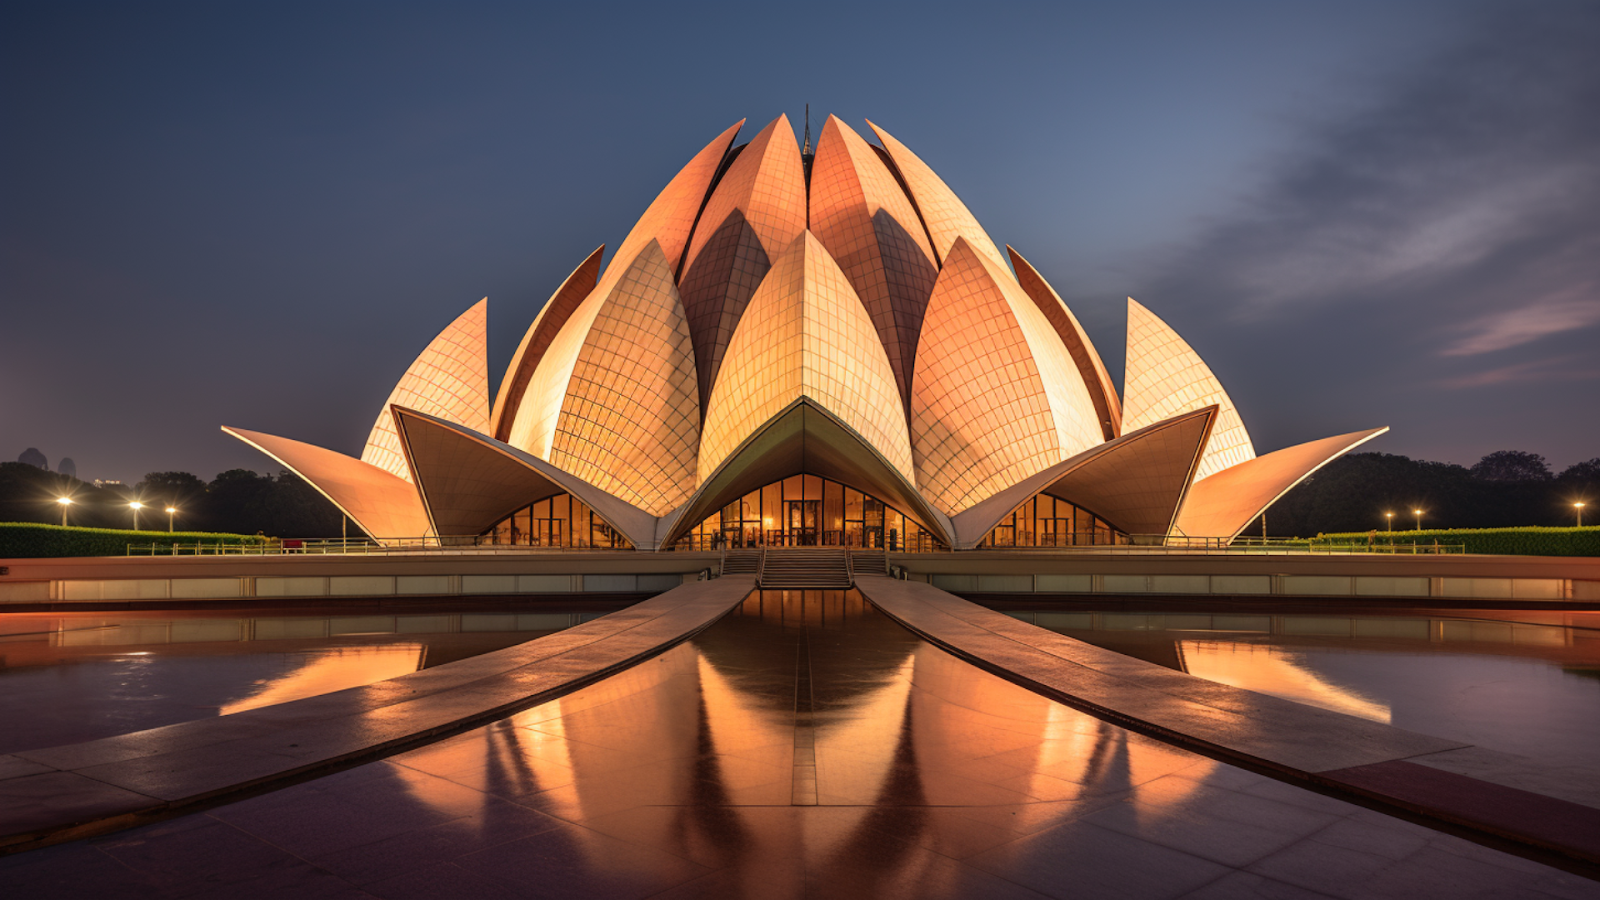 The Lotus Temple in New Delhi, India, under the twilight, representing innovative architecture with its petal-like structure.